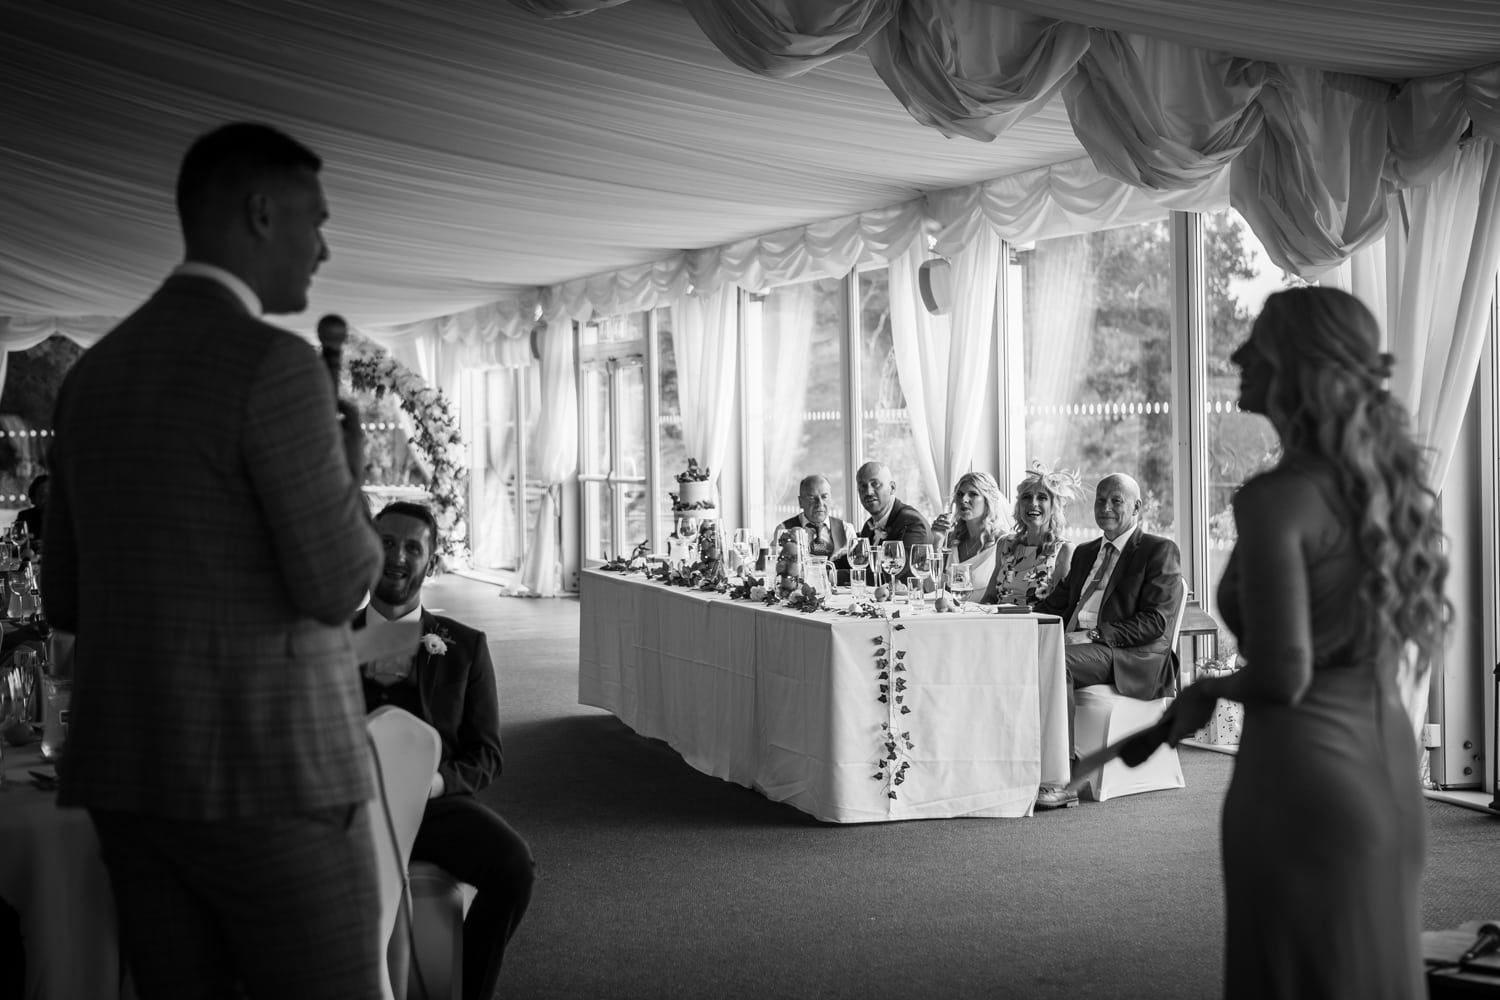 Wedding Speeches at The Black Horse Beamish